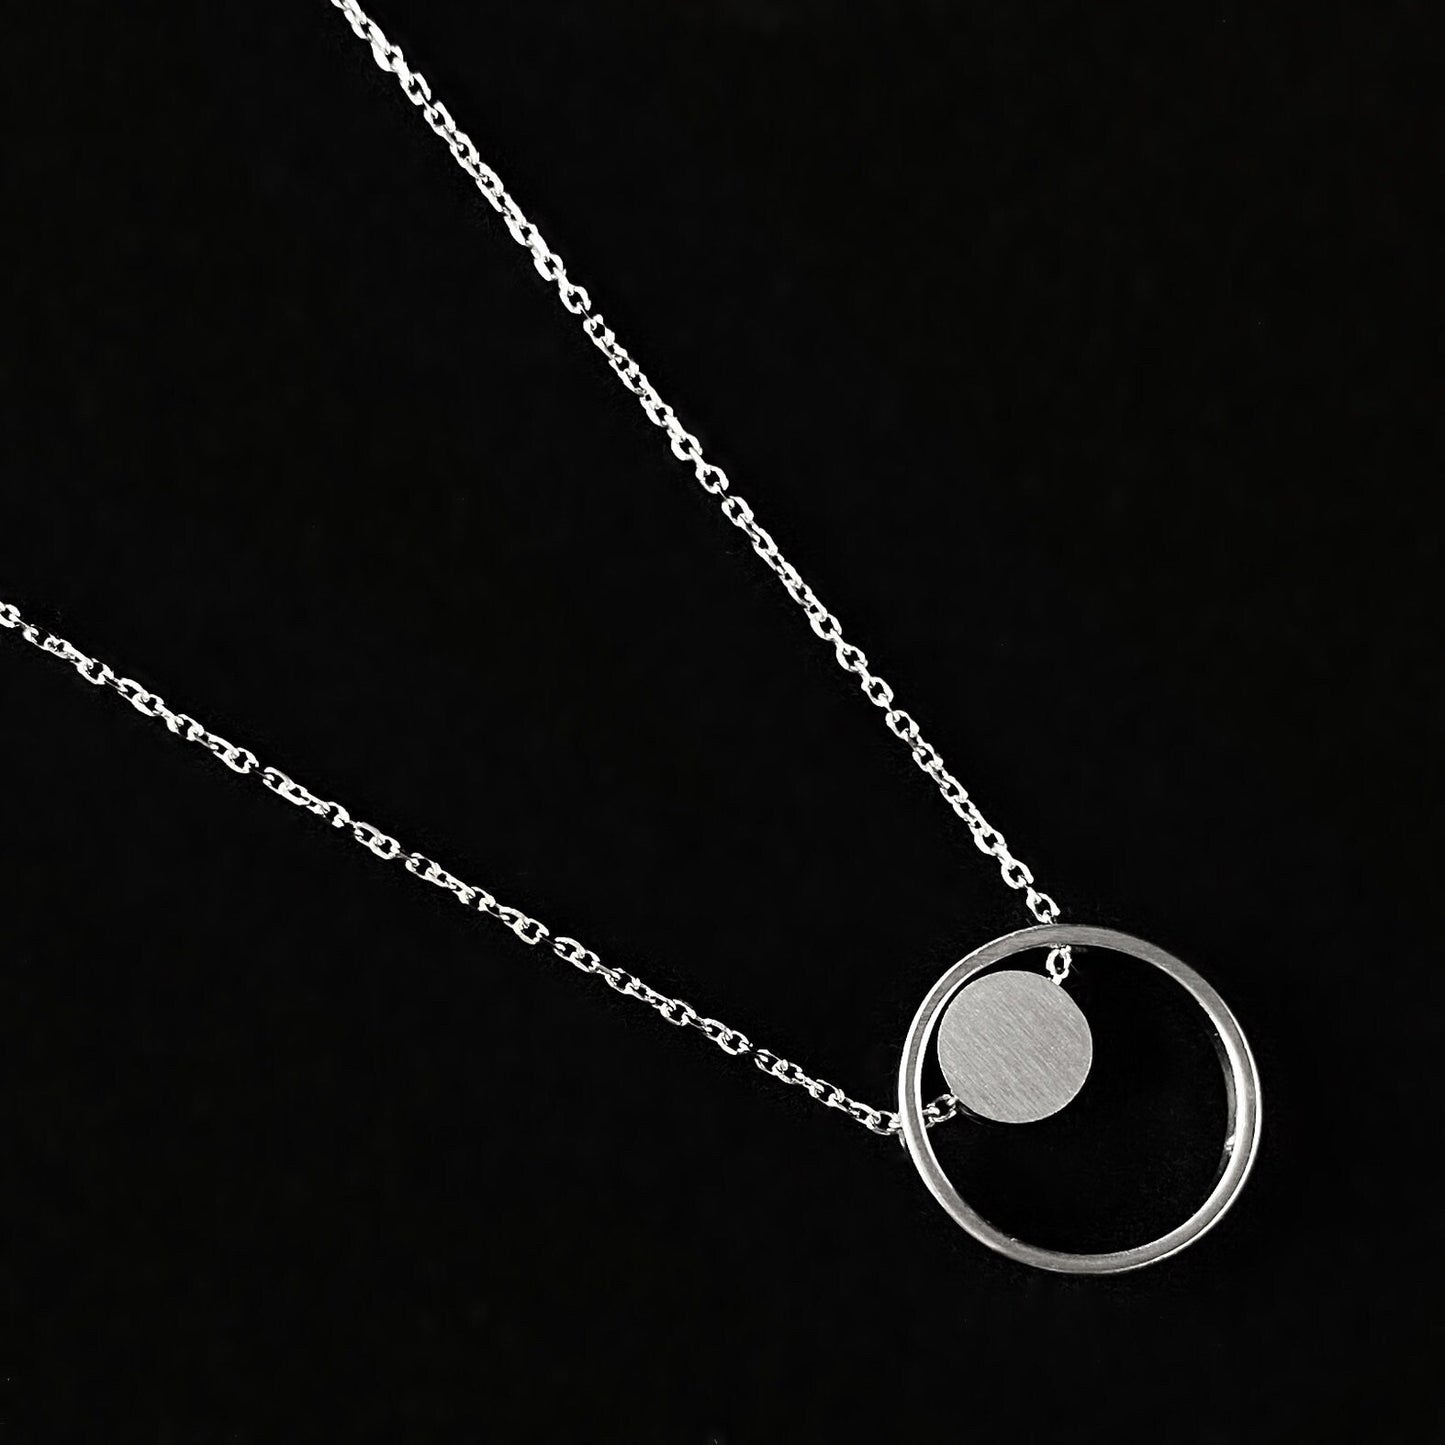 Dainty Silver Moonglow Pendant Necklace - Sabrina